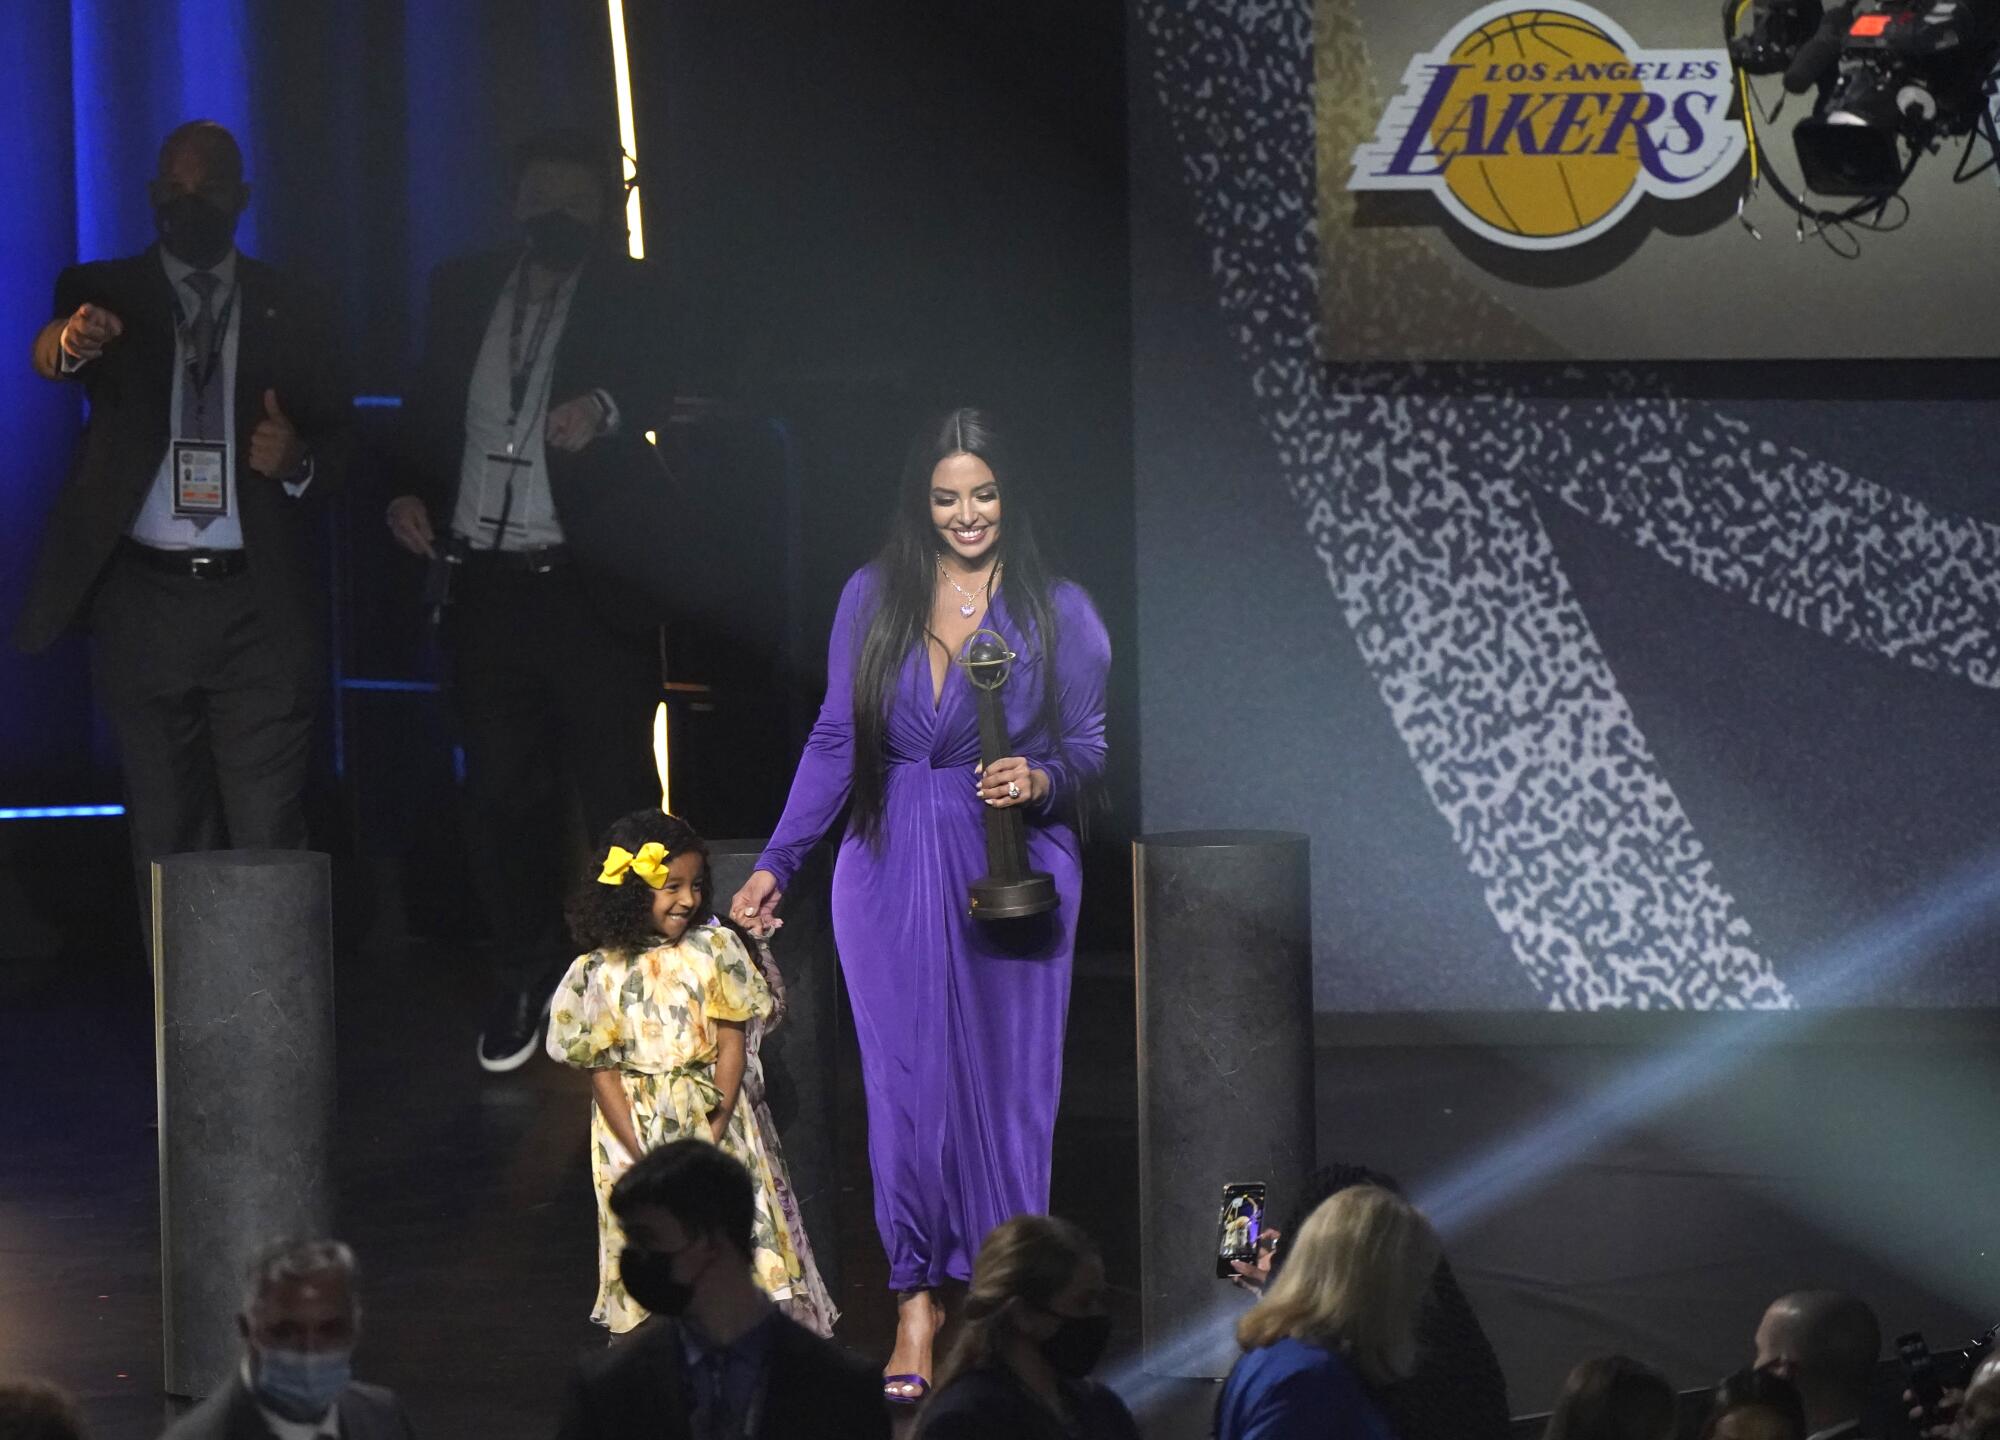 Bianka Bryant smiles for the crowd as her mother, Vanessa, holds Kobe Bryant's Hall of Fame trophy.